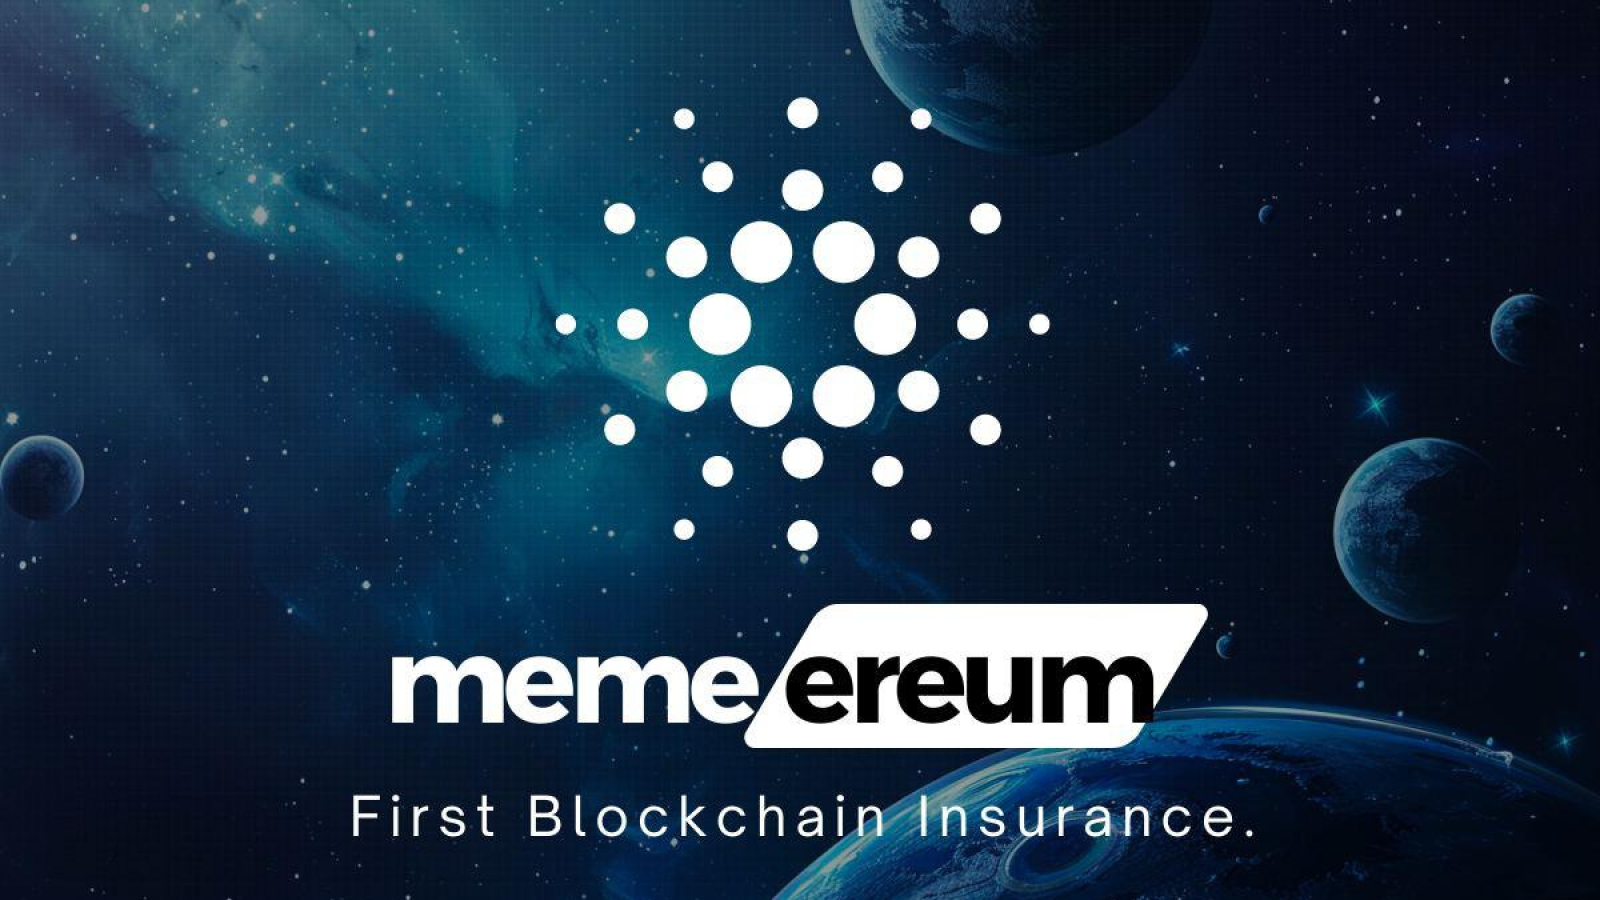 Memereum Sells Over 1M Tokens Within Hours on Presale While Markets Rebound